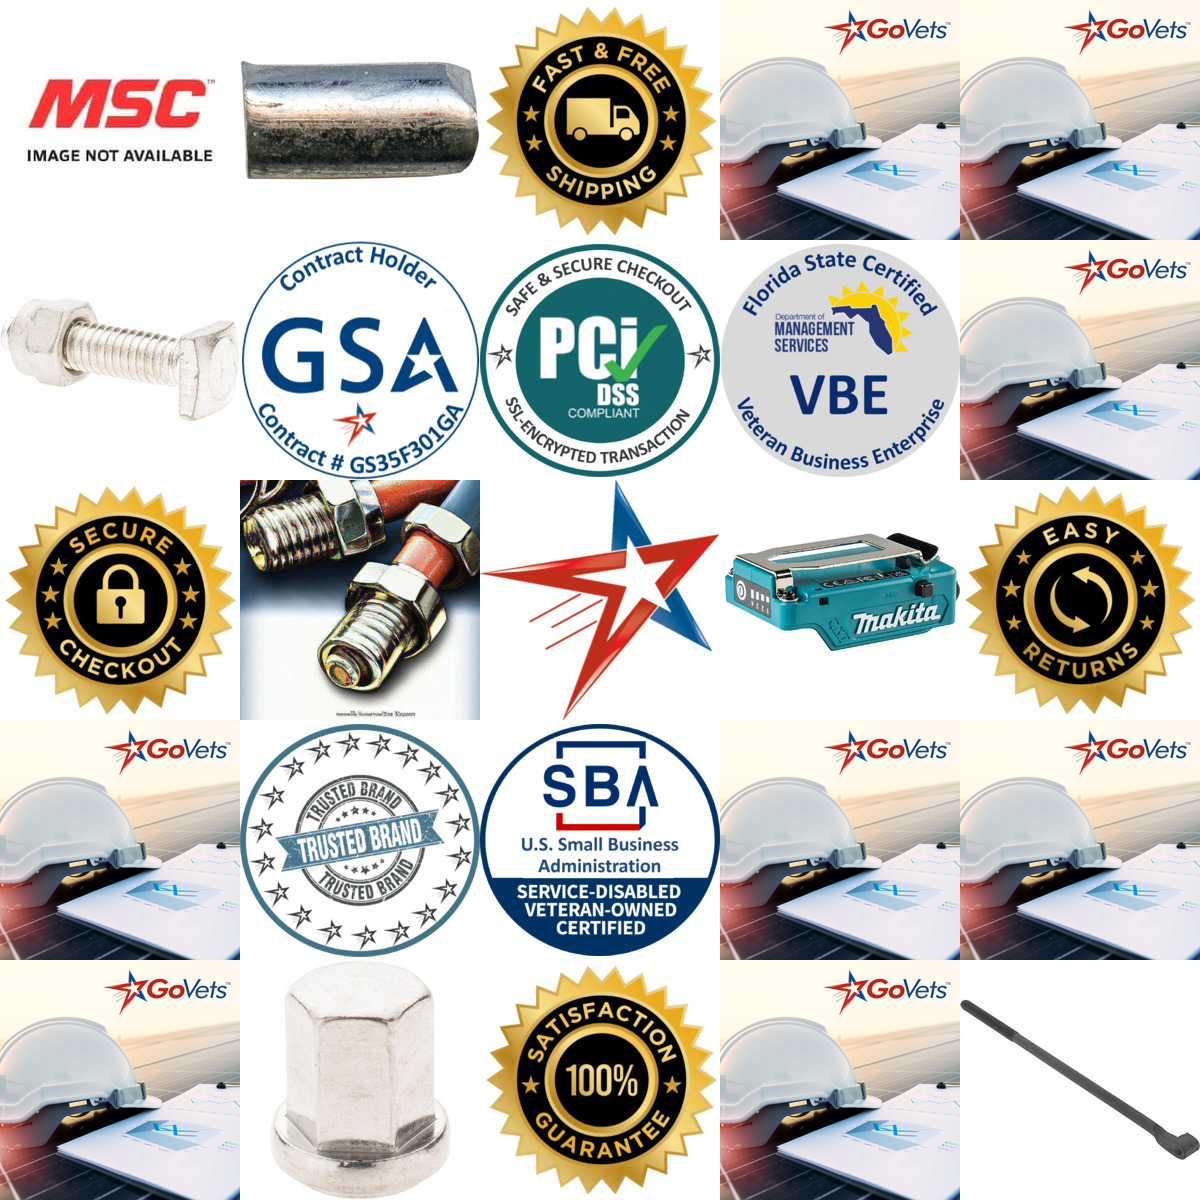 A selection of Battery Connector Accessories products on GoVets